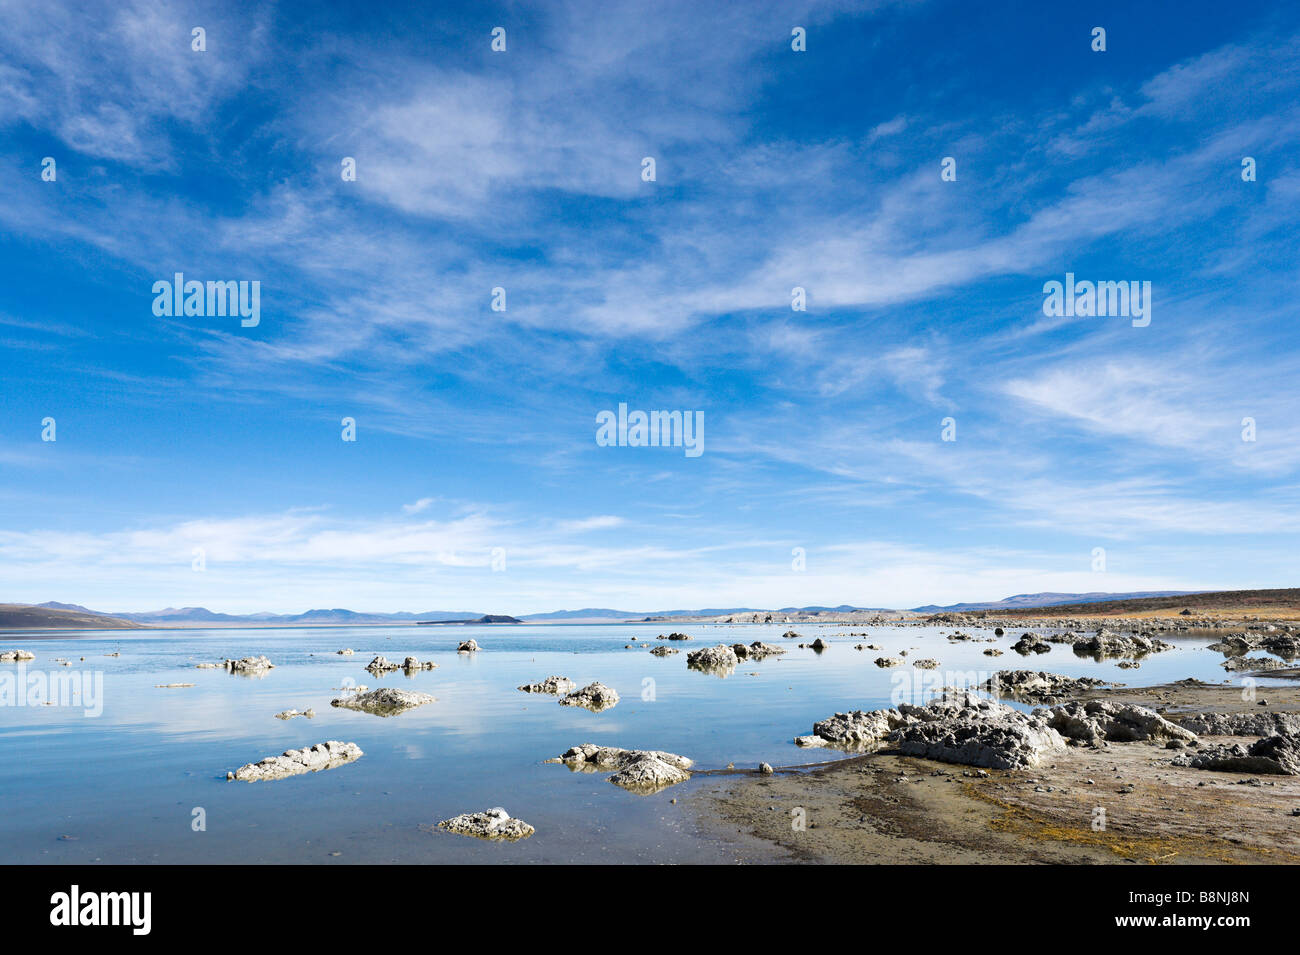 Tufa formations in Mono Lake just off US Highway 395, High Sierra, California, USA Stock Photo